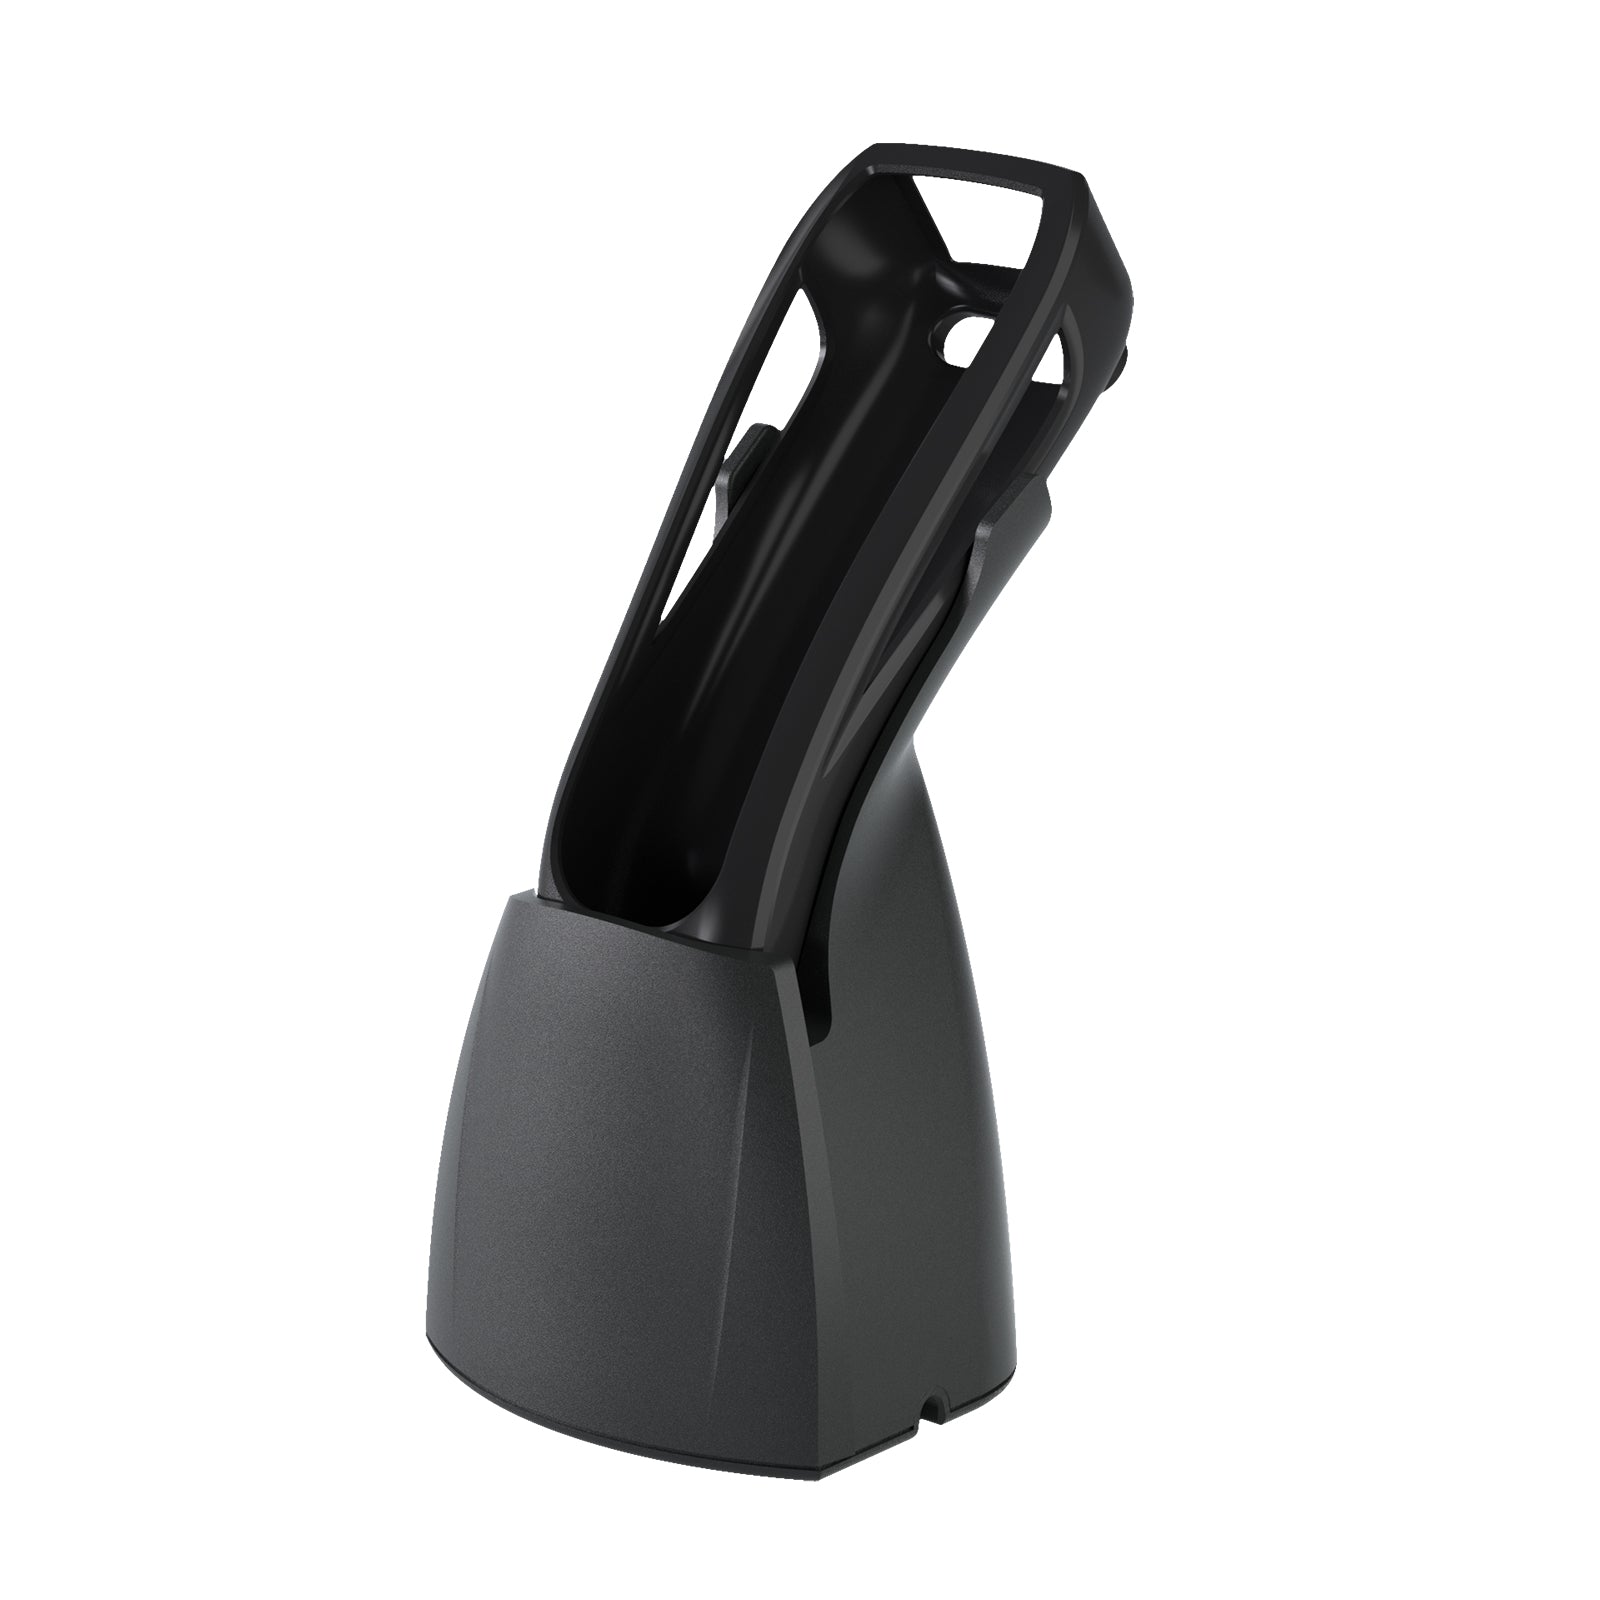 NETUM Barcode Scanner Charging Base, Suitable for C750,C740,C830,C850,C990 and C200, Scanner Not Included